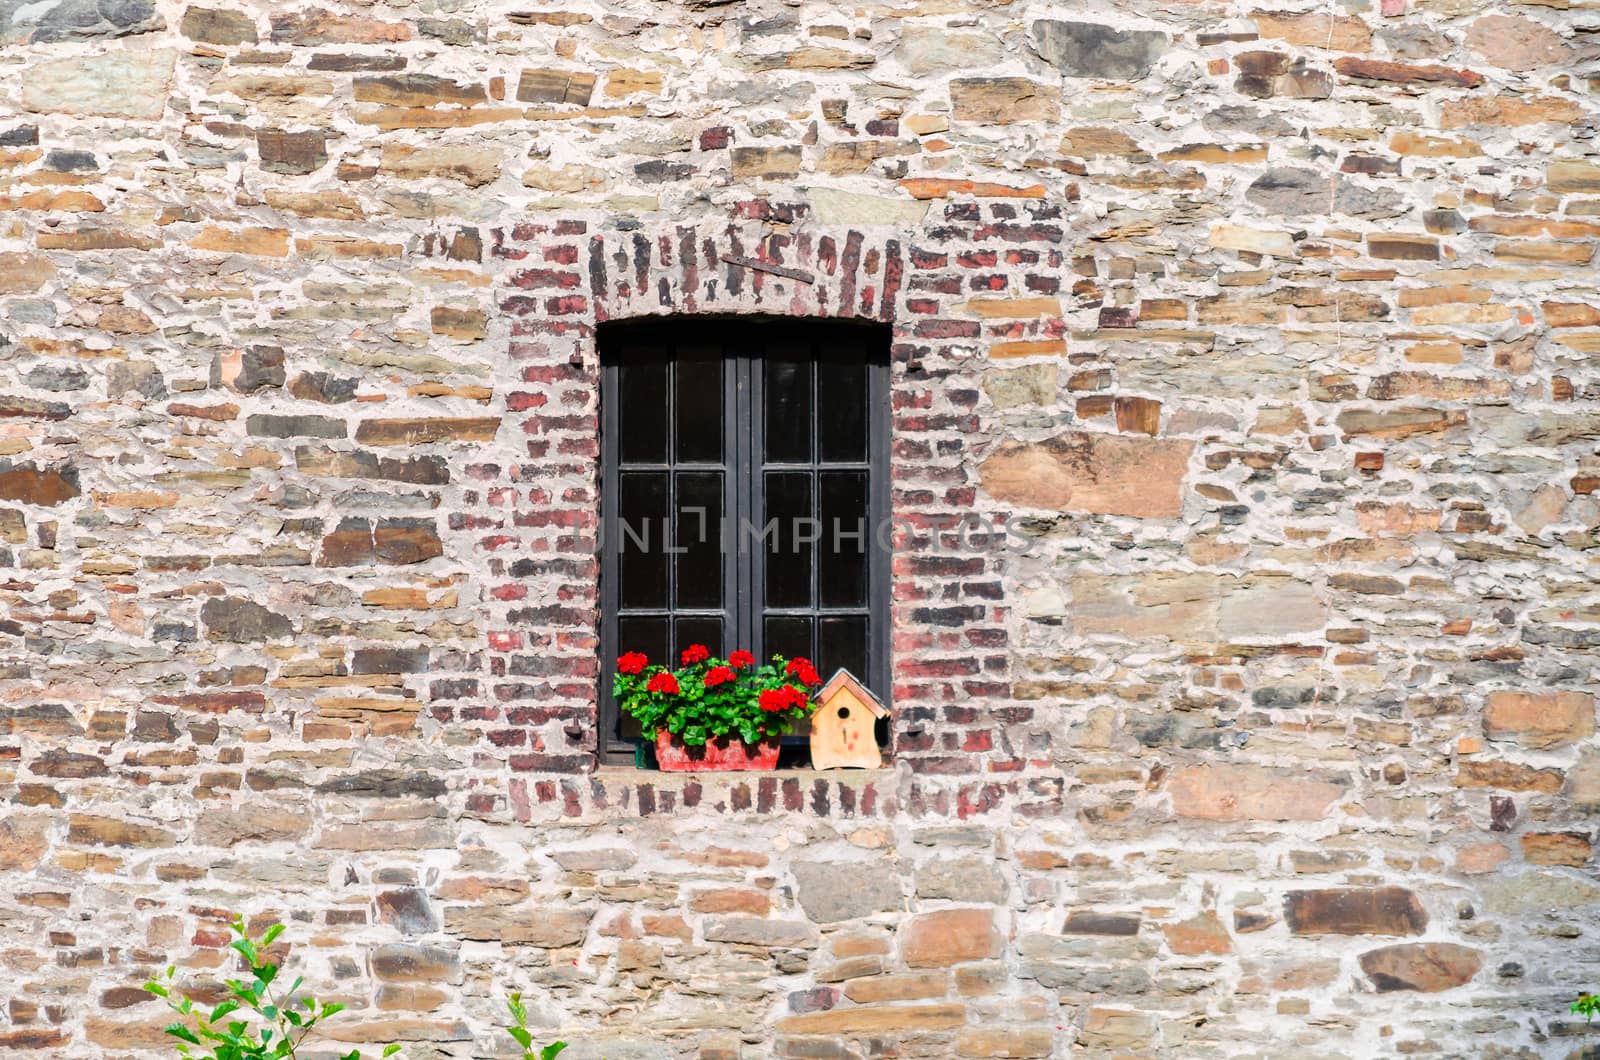 Historic window of a castle with stained glass